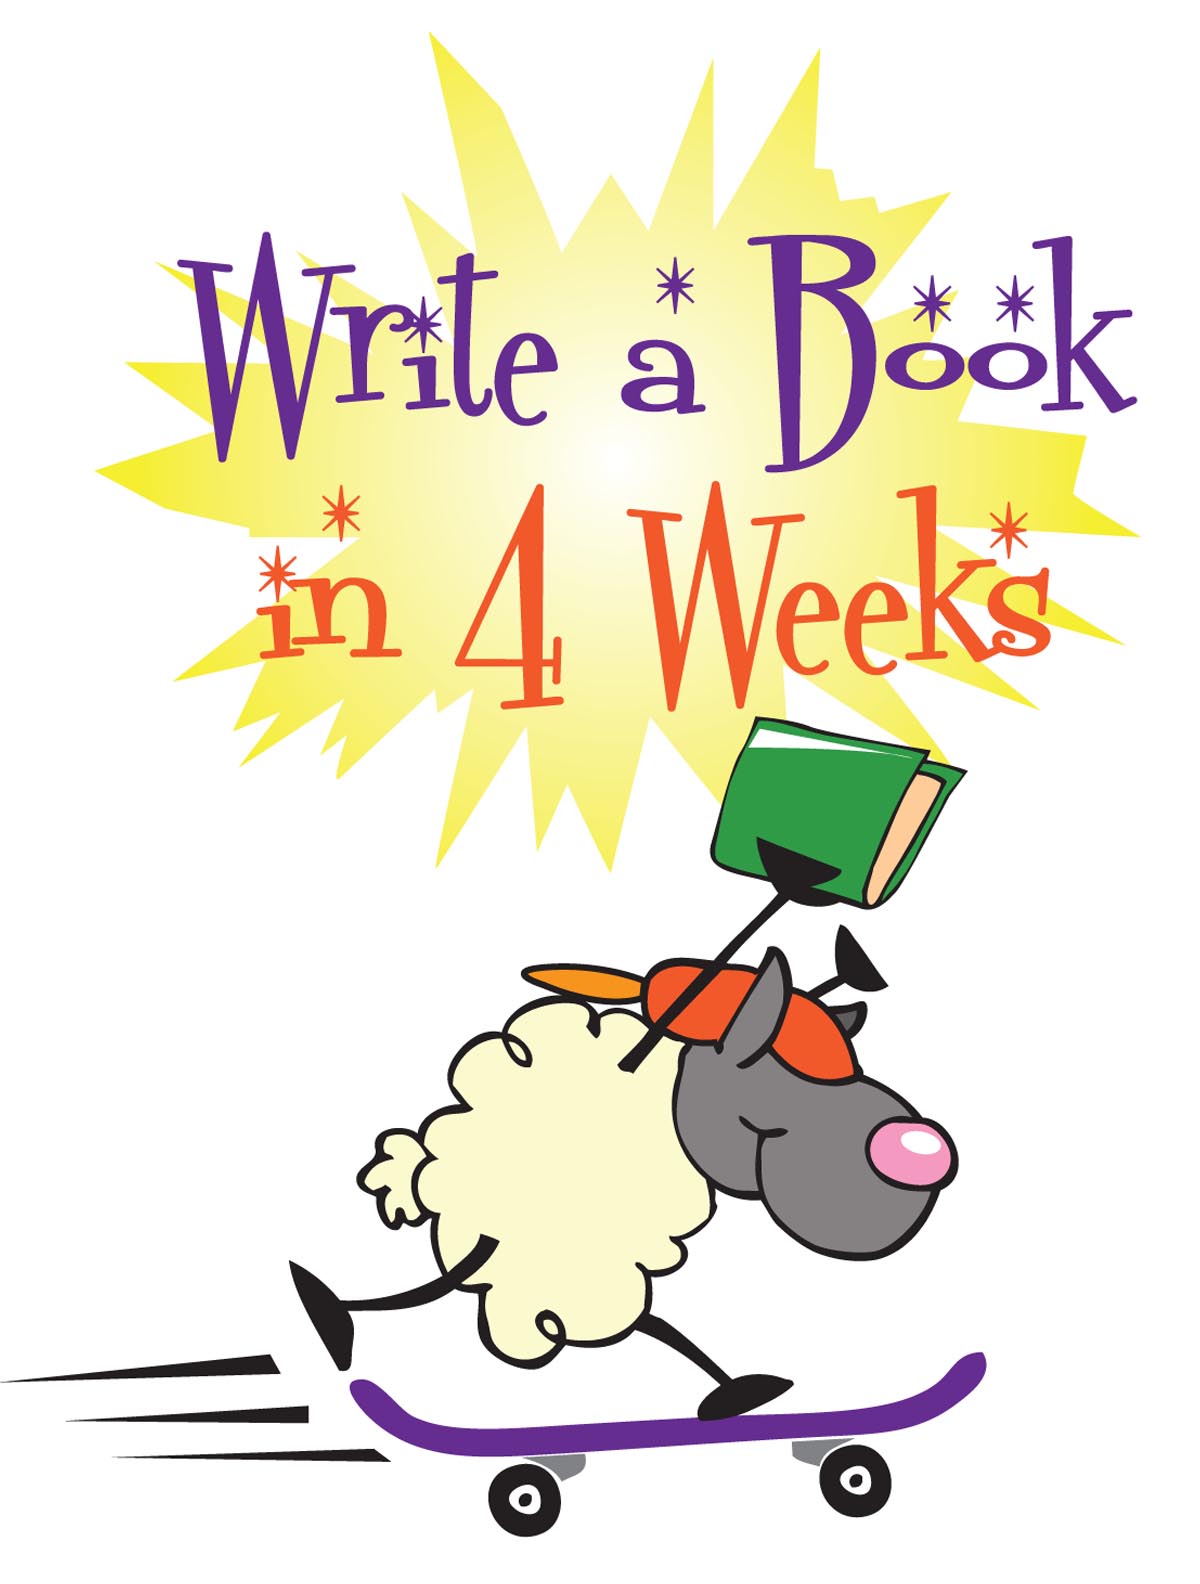 Last Chance to Sign Up for Write Your Book in 4 Weeks!